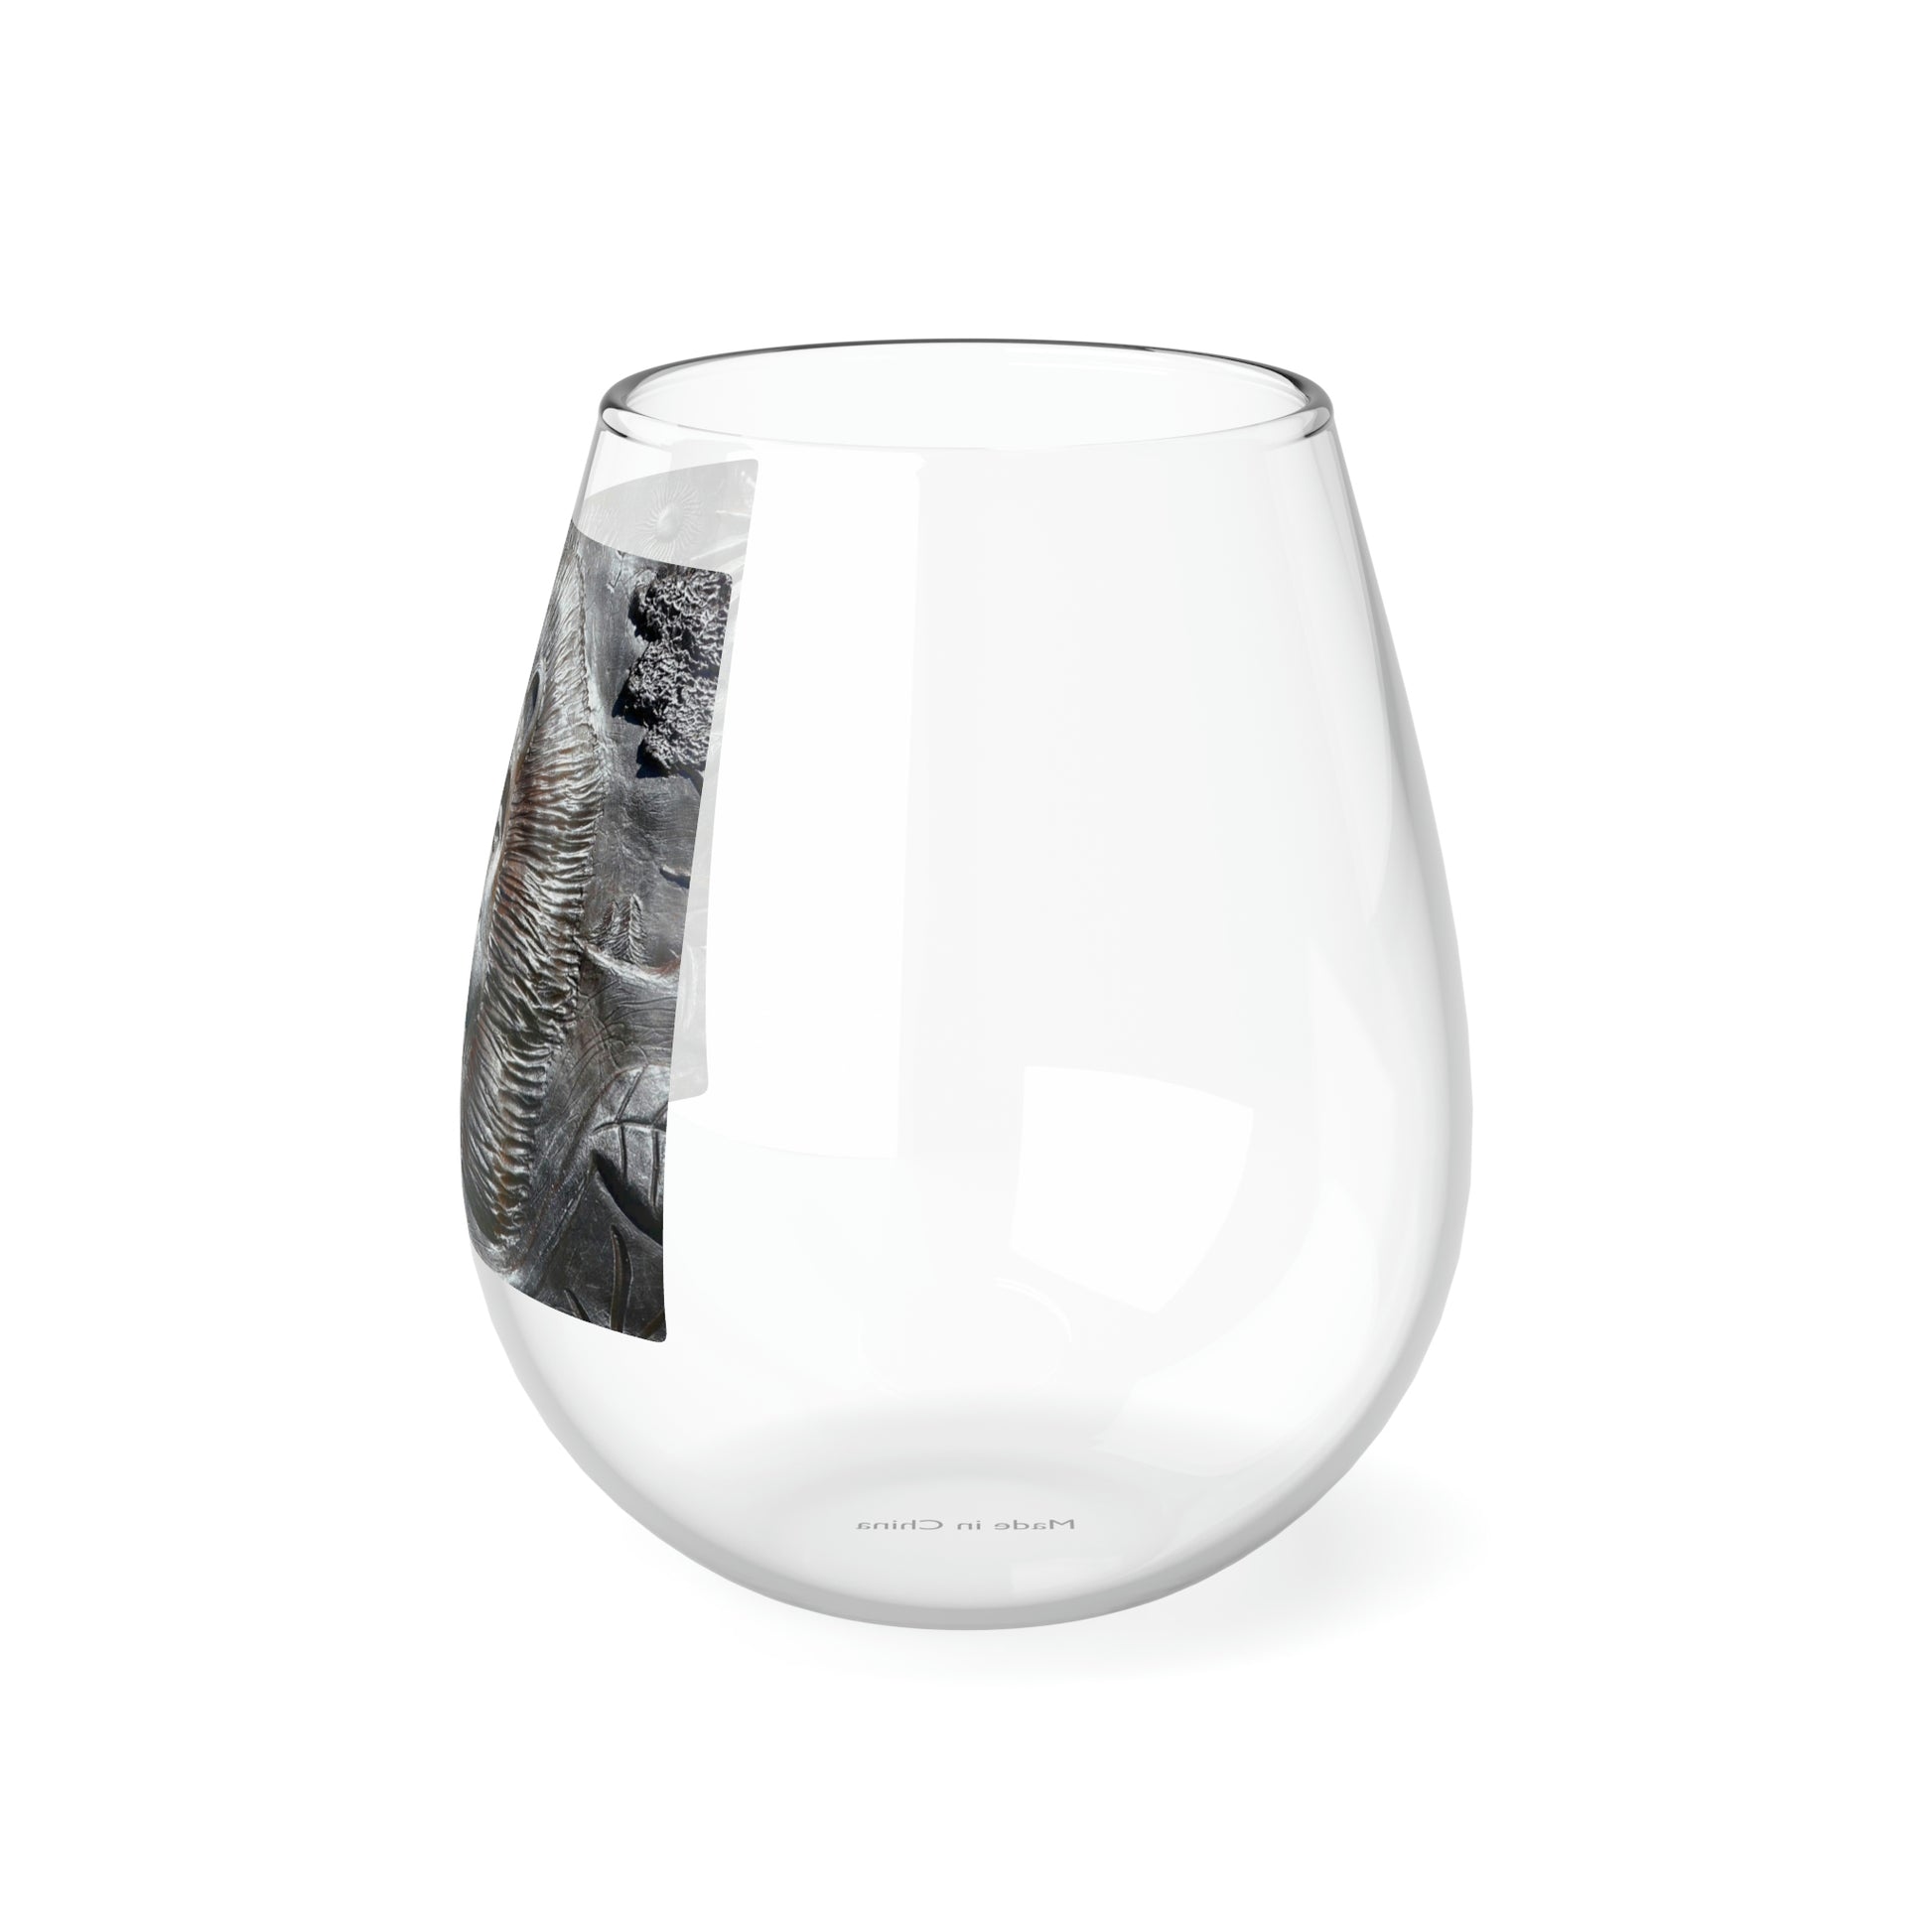 Lion's Friends Forever - Stemless Wine Glass, 11.75 oz - Fry1Productions